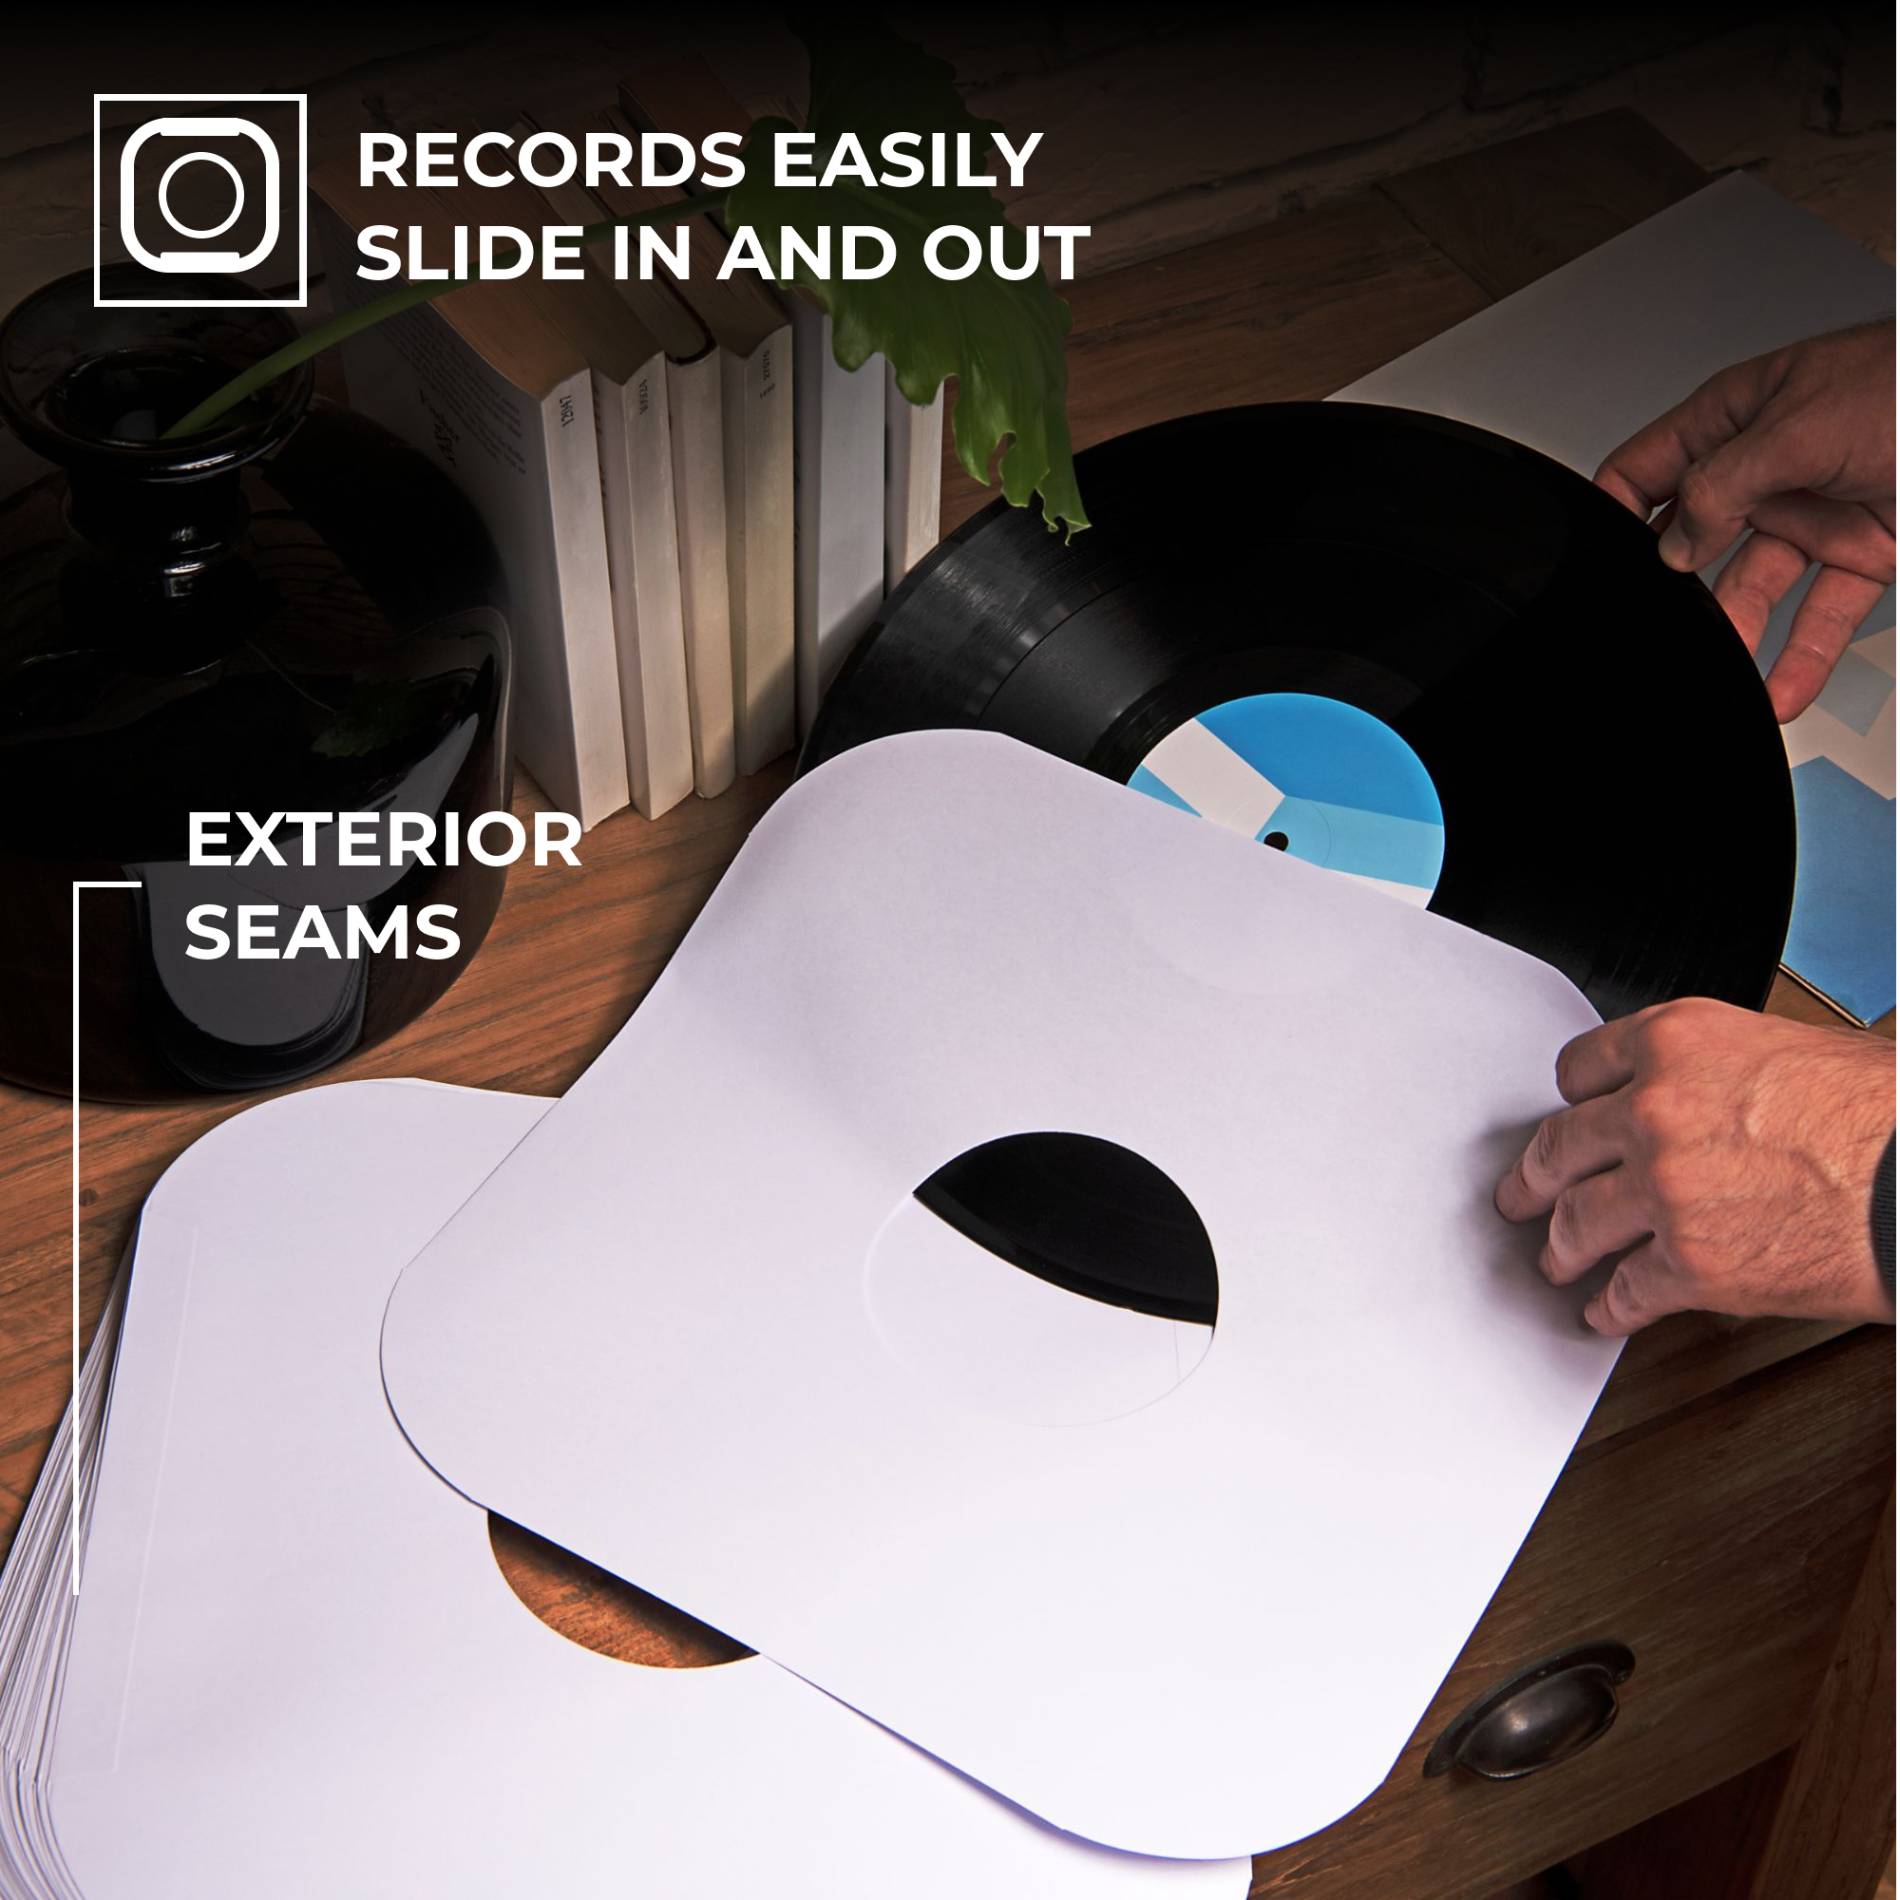 500) 7 Record Inner Sleeves - White ARCHIVAL Paper ACID FREE 45rpm - #07IW  844568040678